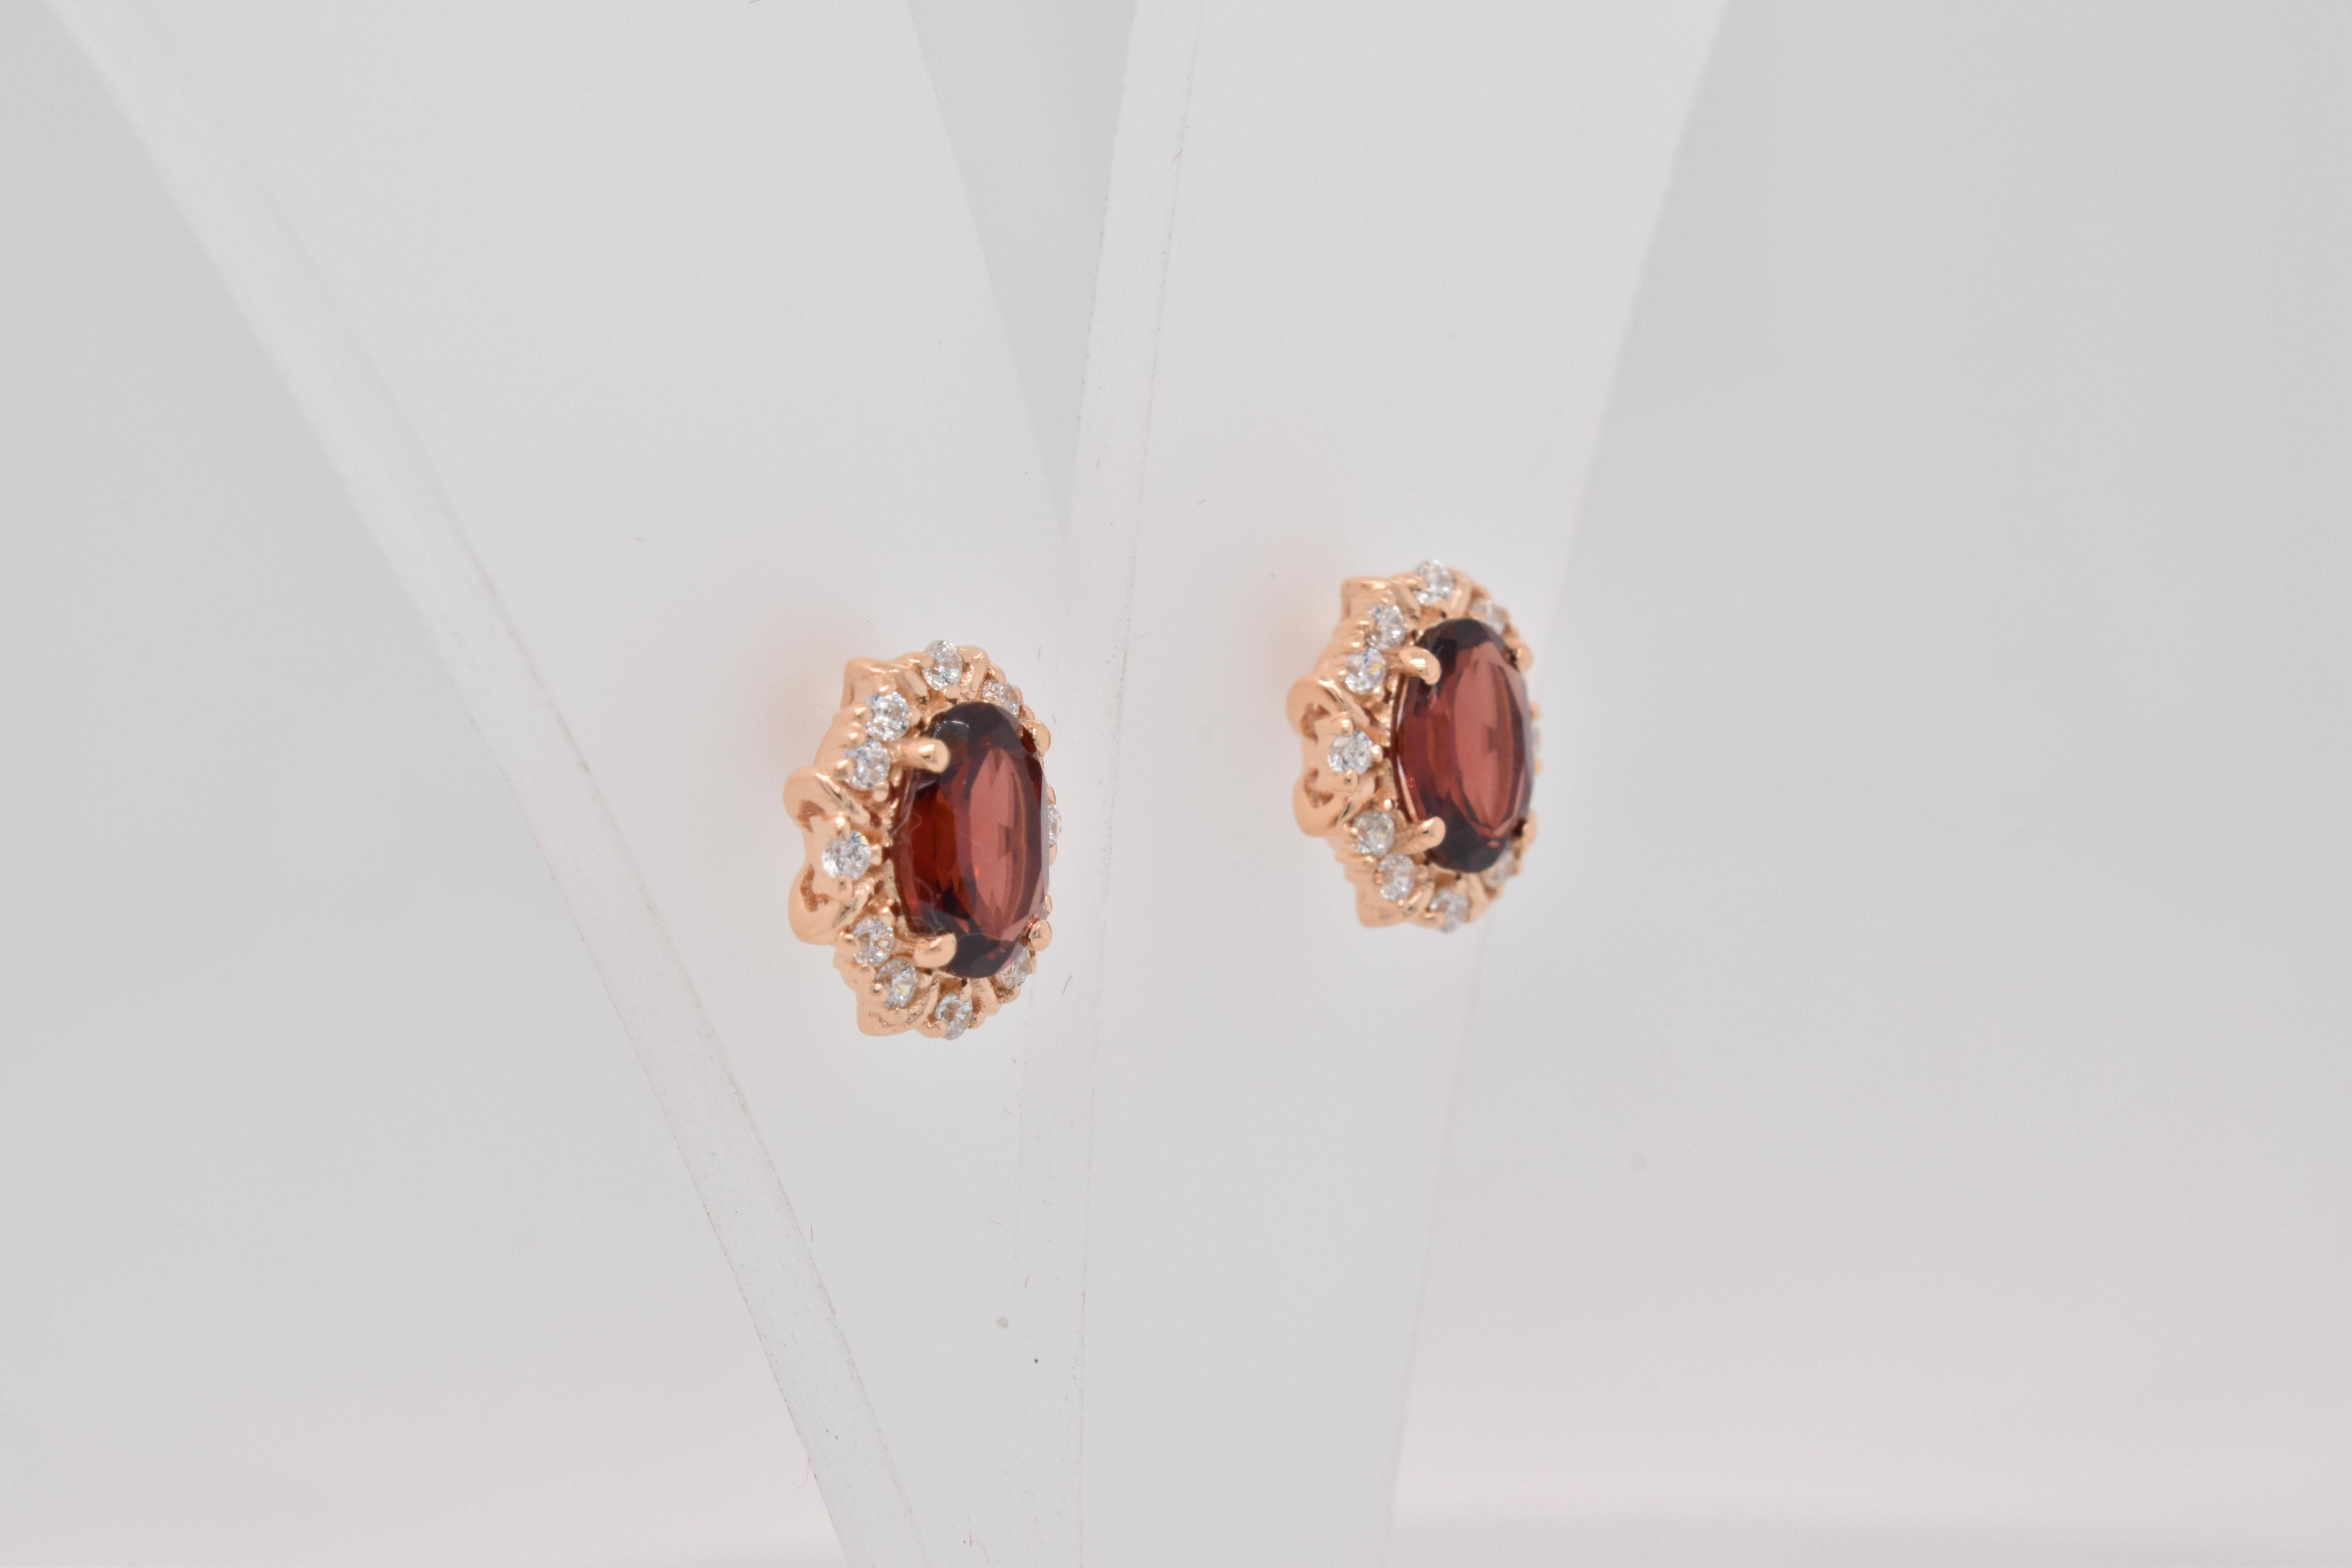 Oval Shape Garnet Gemstone And CZ beautifully crafted  in a Earrings. A fiery Red Color January Birthstone. For a special occasion like Engagement or Proposal or may be as a gift for a special person.

Primary Stone Size - 7x5 mm